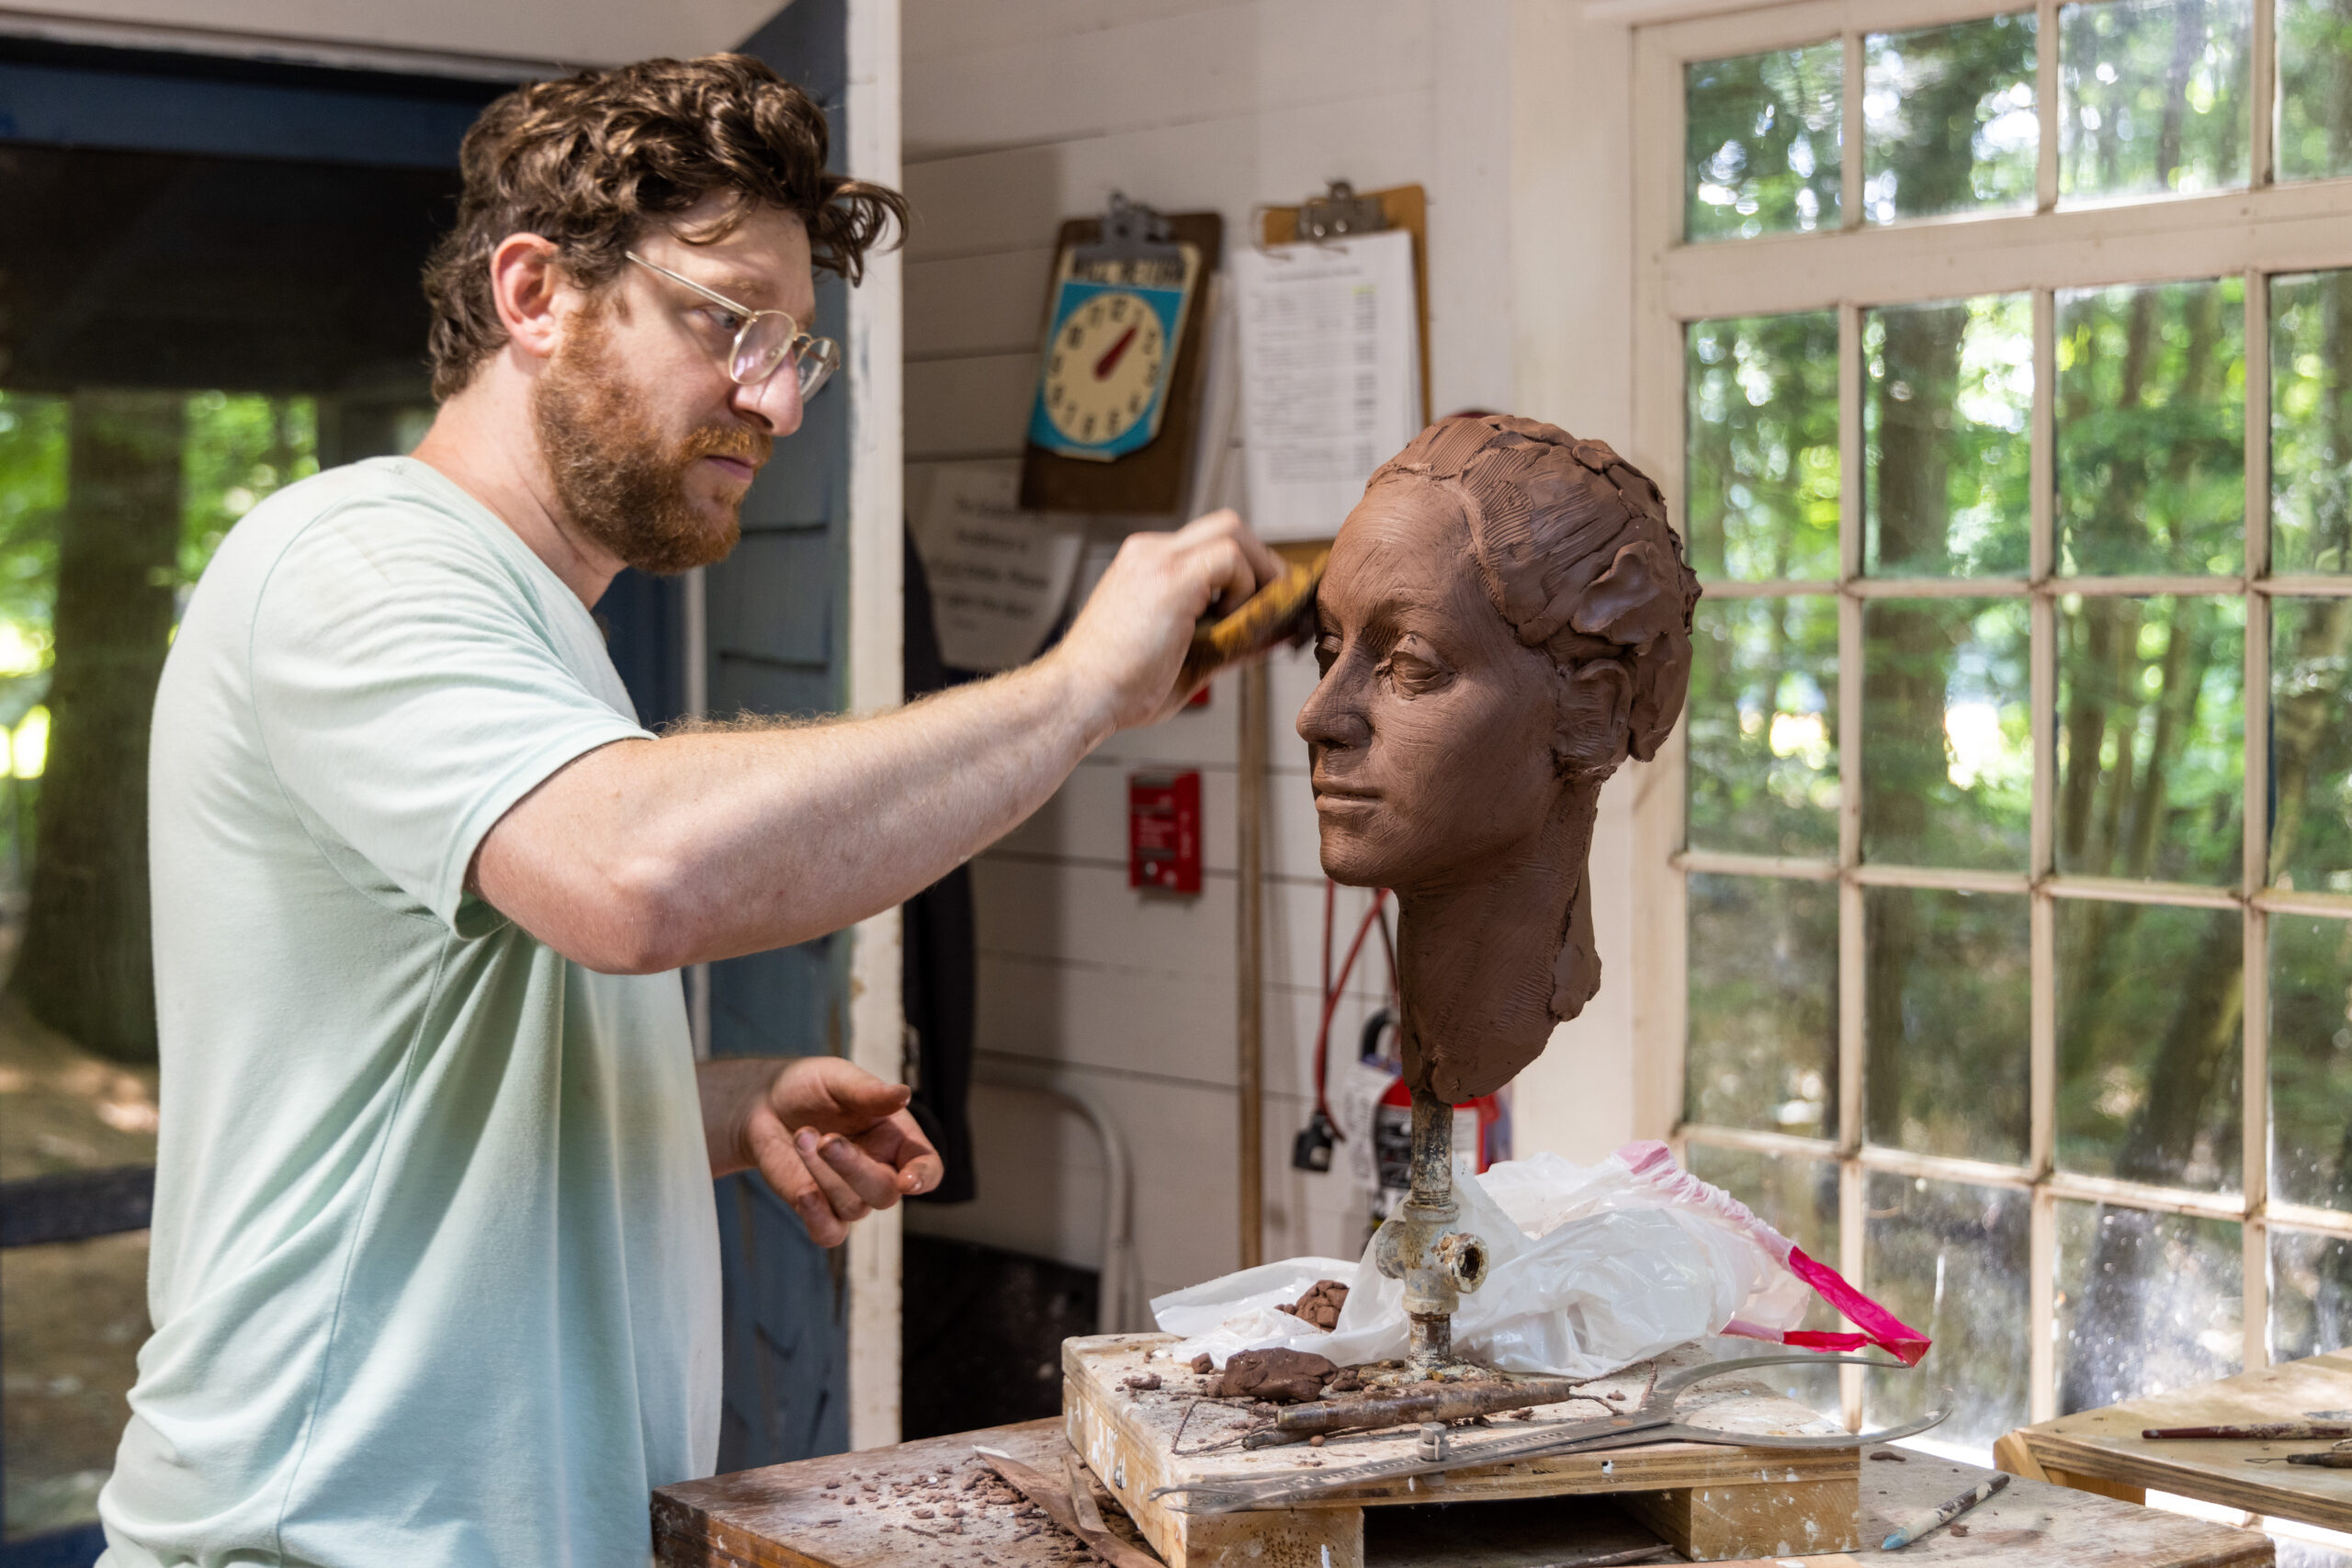 Sculptor-in- Residence Sean Hunter Williams at work in the Ravine Studio. Photo by Rob Strong